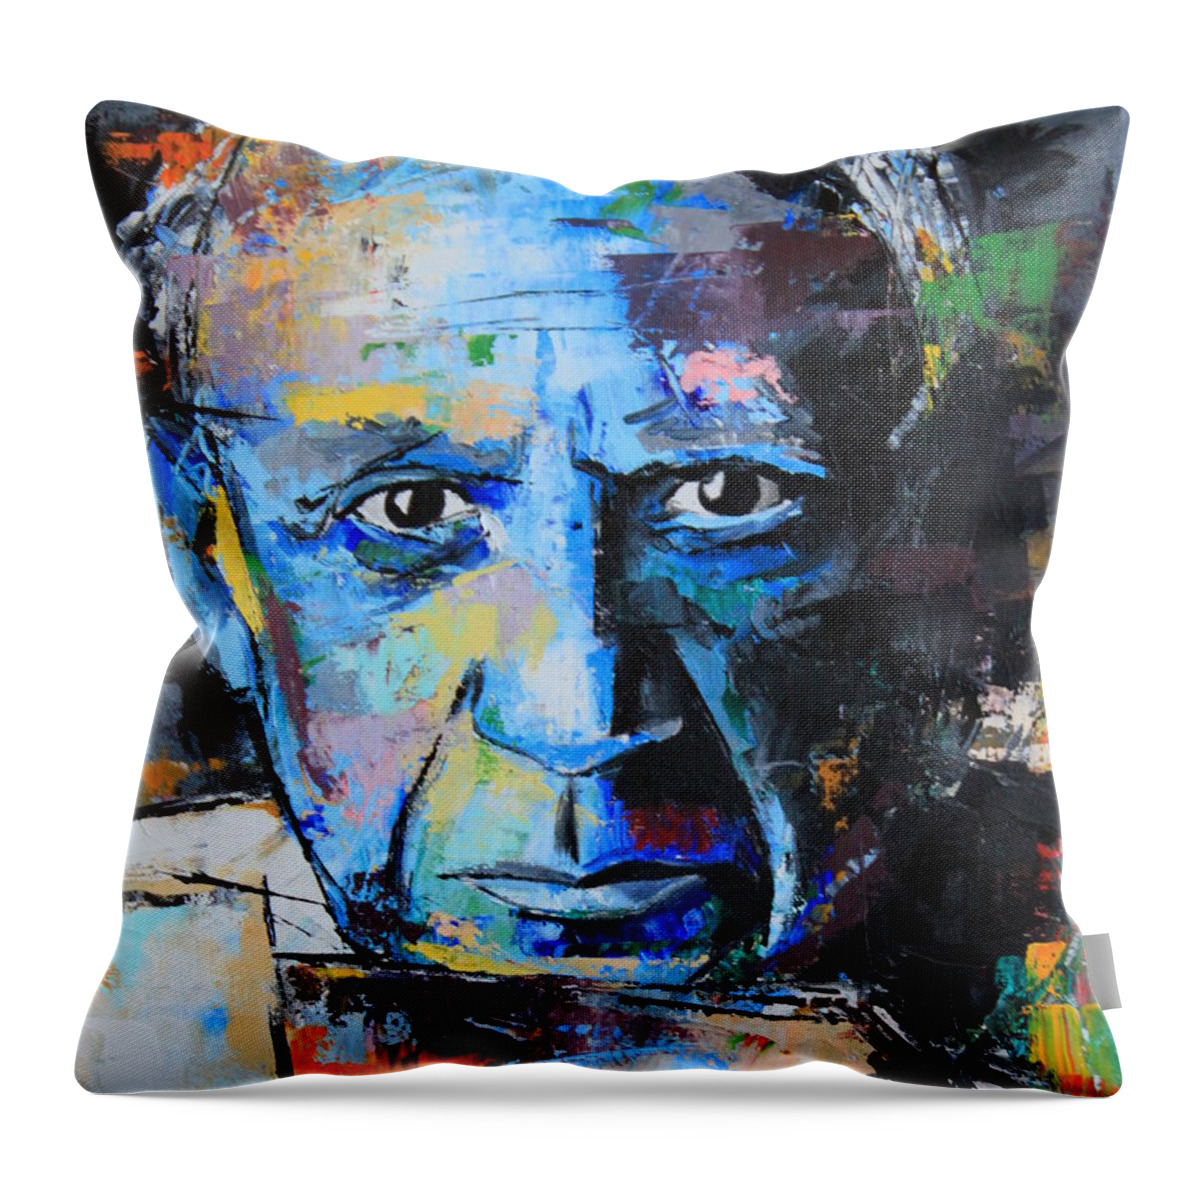 Pablo Picasso Throw Pillow featuring the painting Pablo Picasso by Richard Day